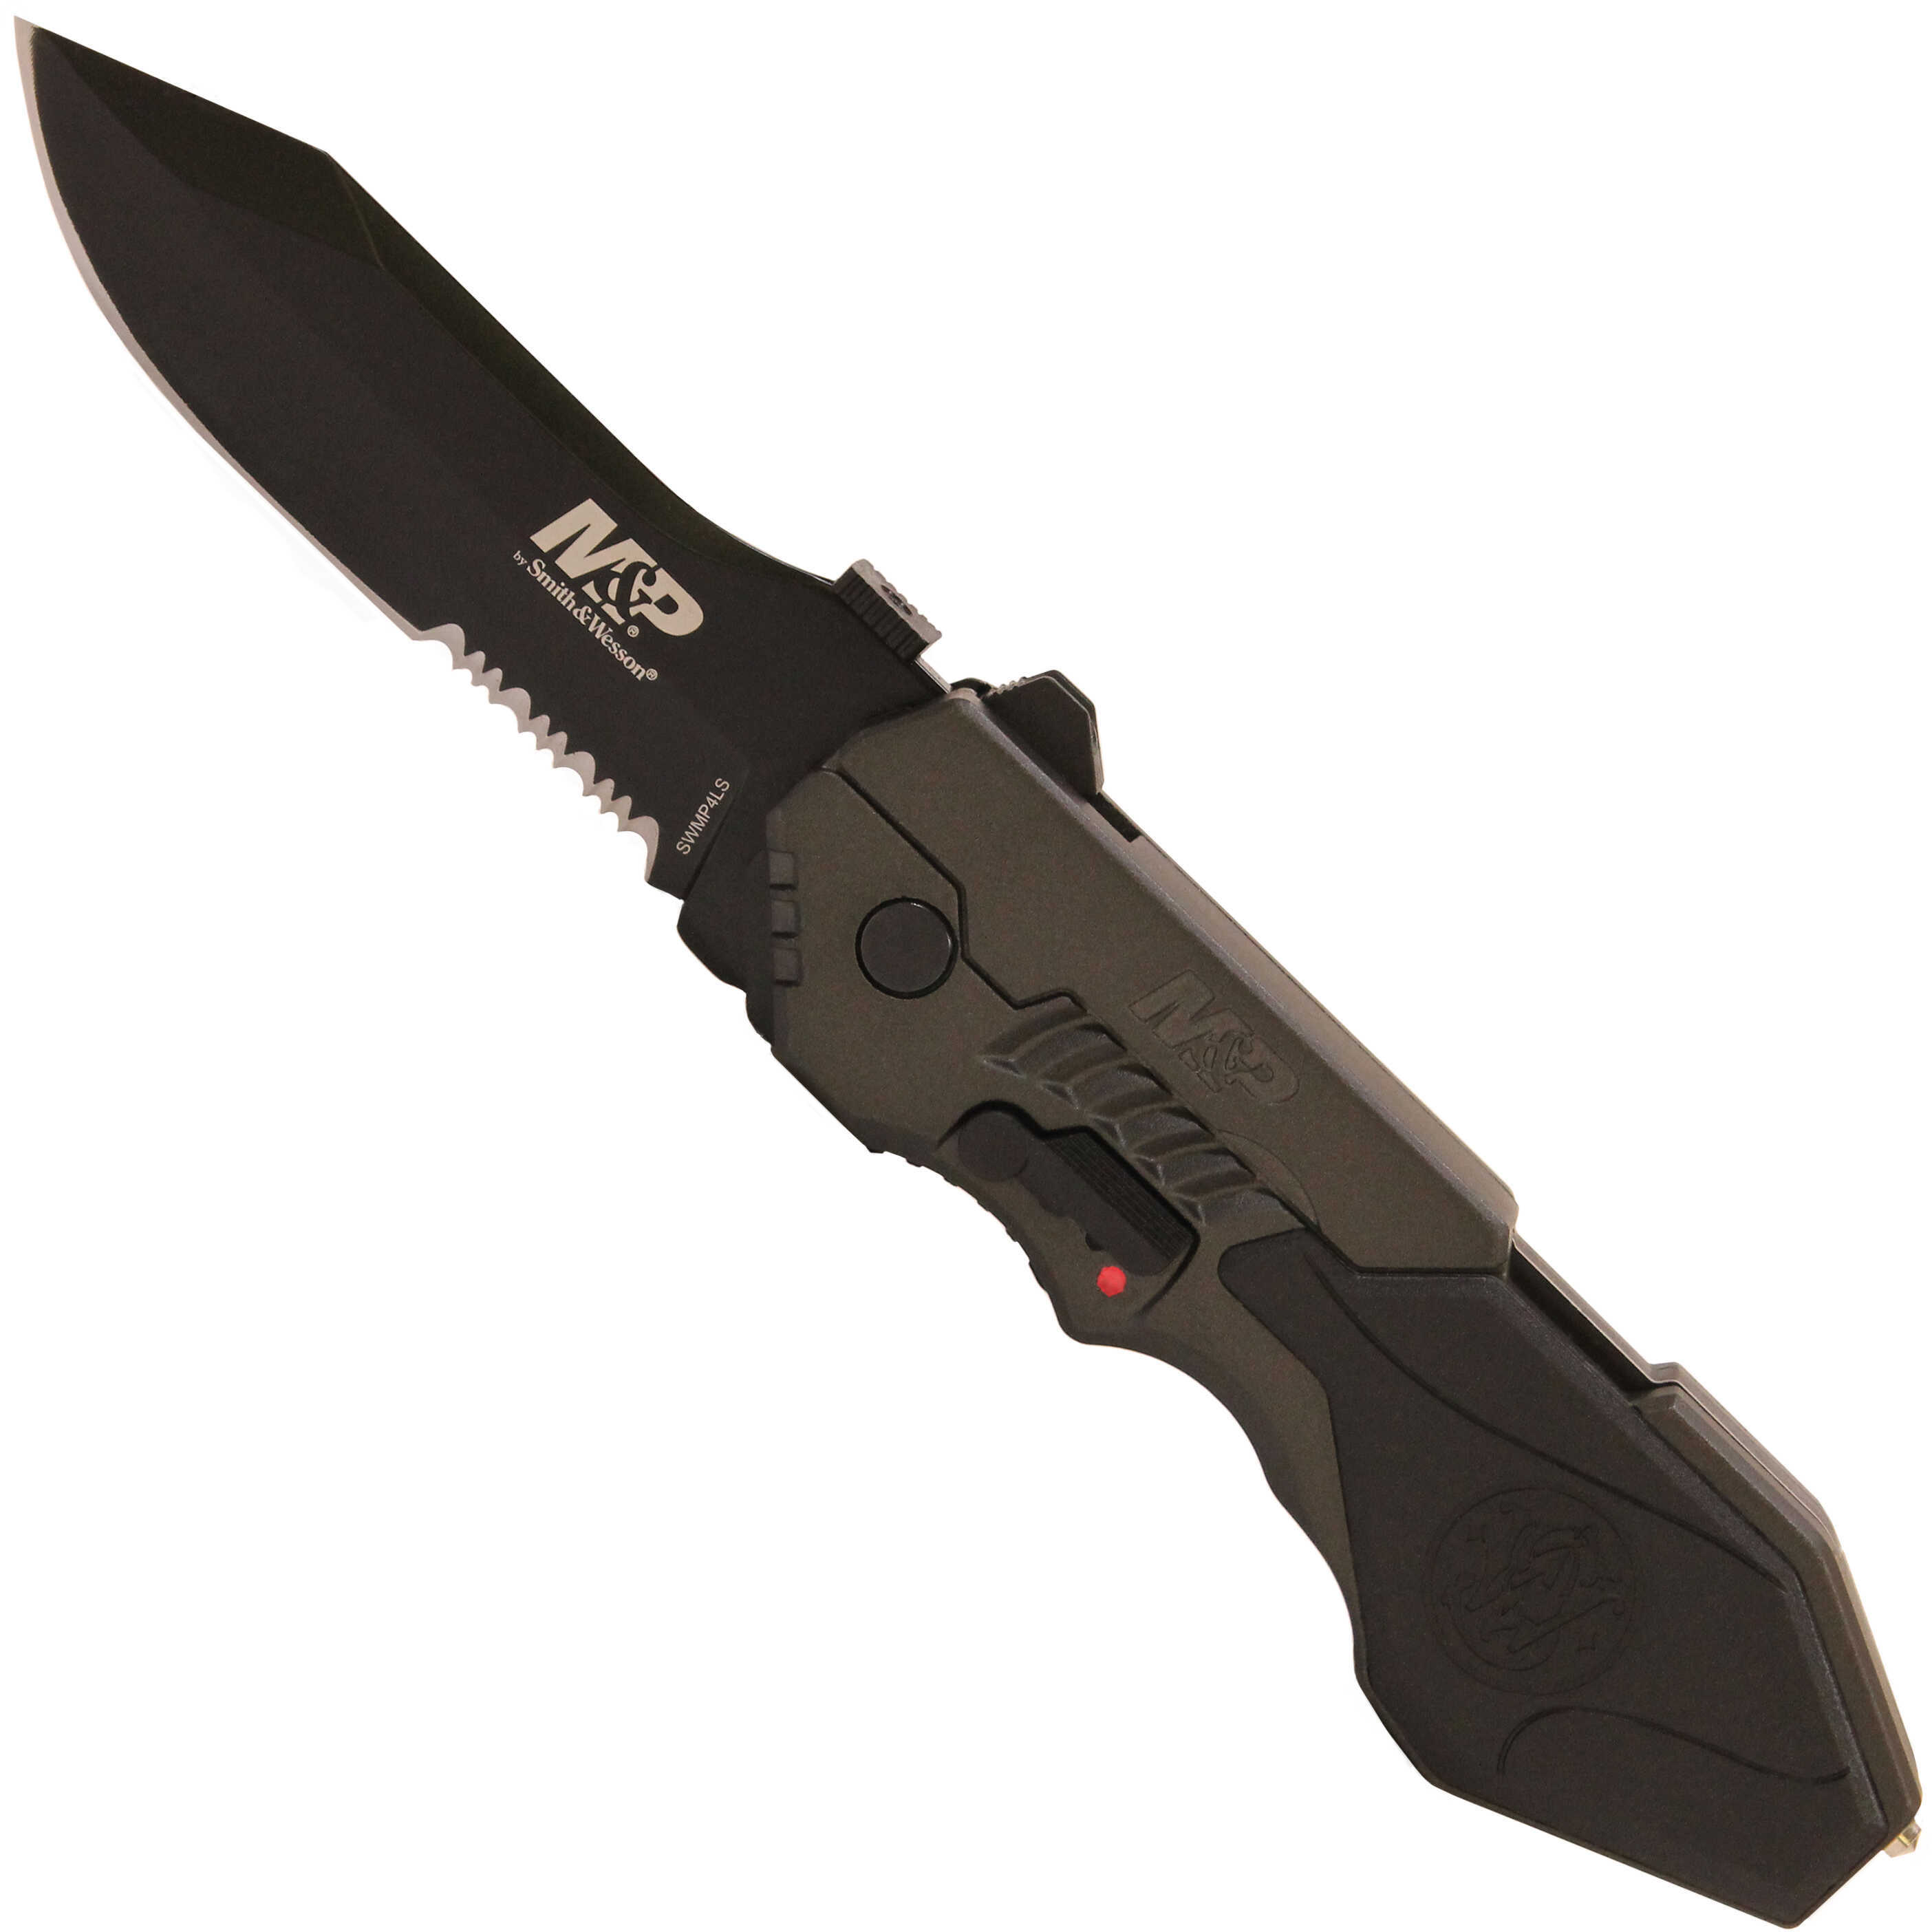 Smith & Wesson M&P M.A.G.I.C. Assisted Opening Clip Point Folding Knife 3 3/5" Blade Black